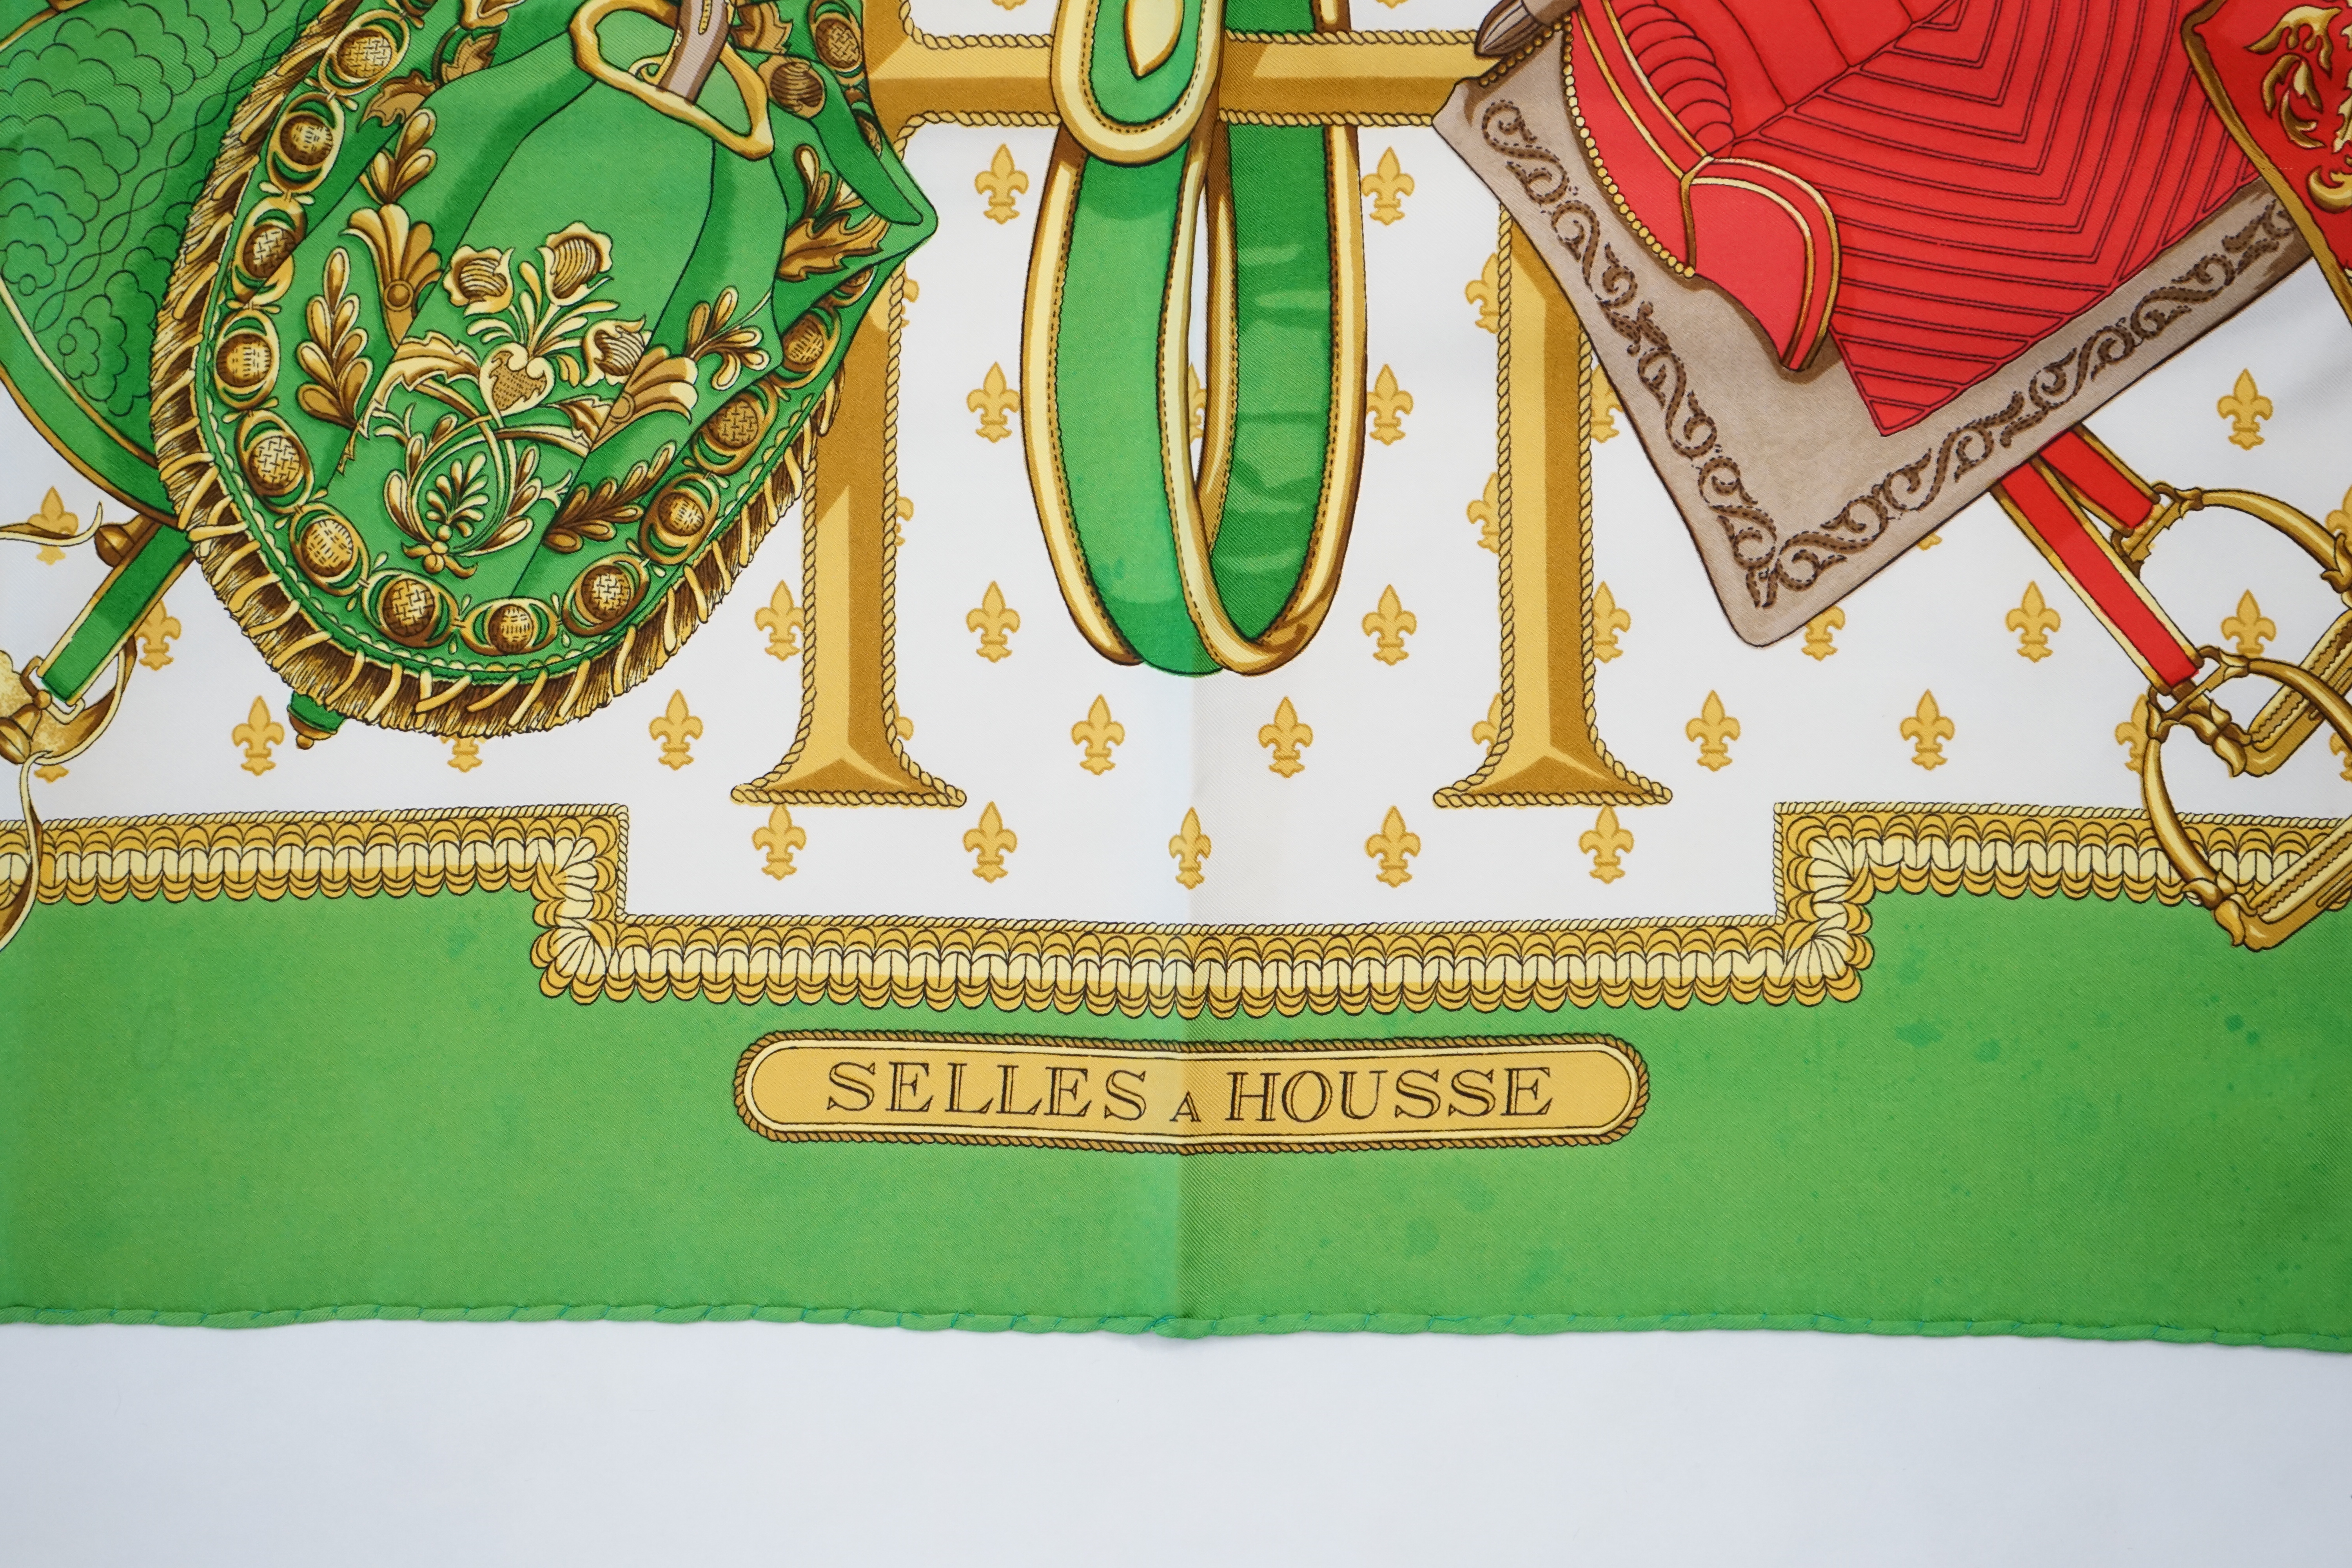 A Hermès silk Scarf "Selles a Housse" by Christiane Vauzelles, green/red/white/gold, with box, - Image 6 of 6